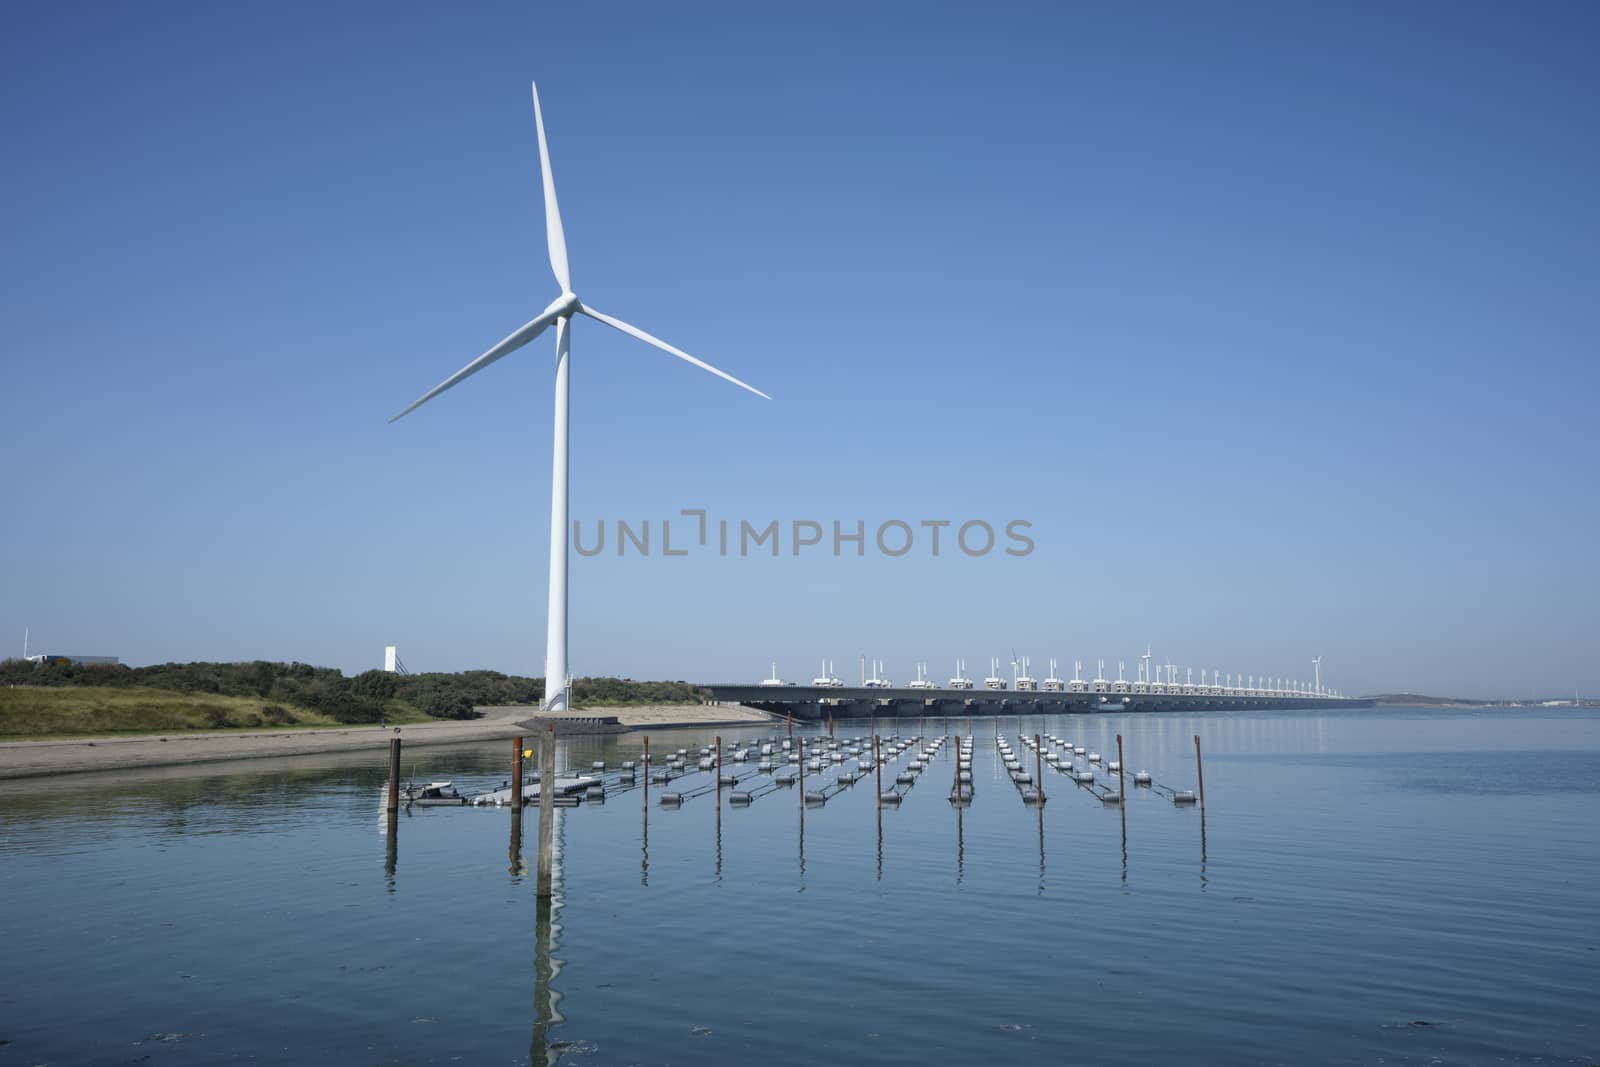 the zeelandbrug deltaworks in holland at the Oosterschelde river to protect holland form high sea level, this is near the dutch museum neeltje jans by Tjeerdkruse